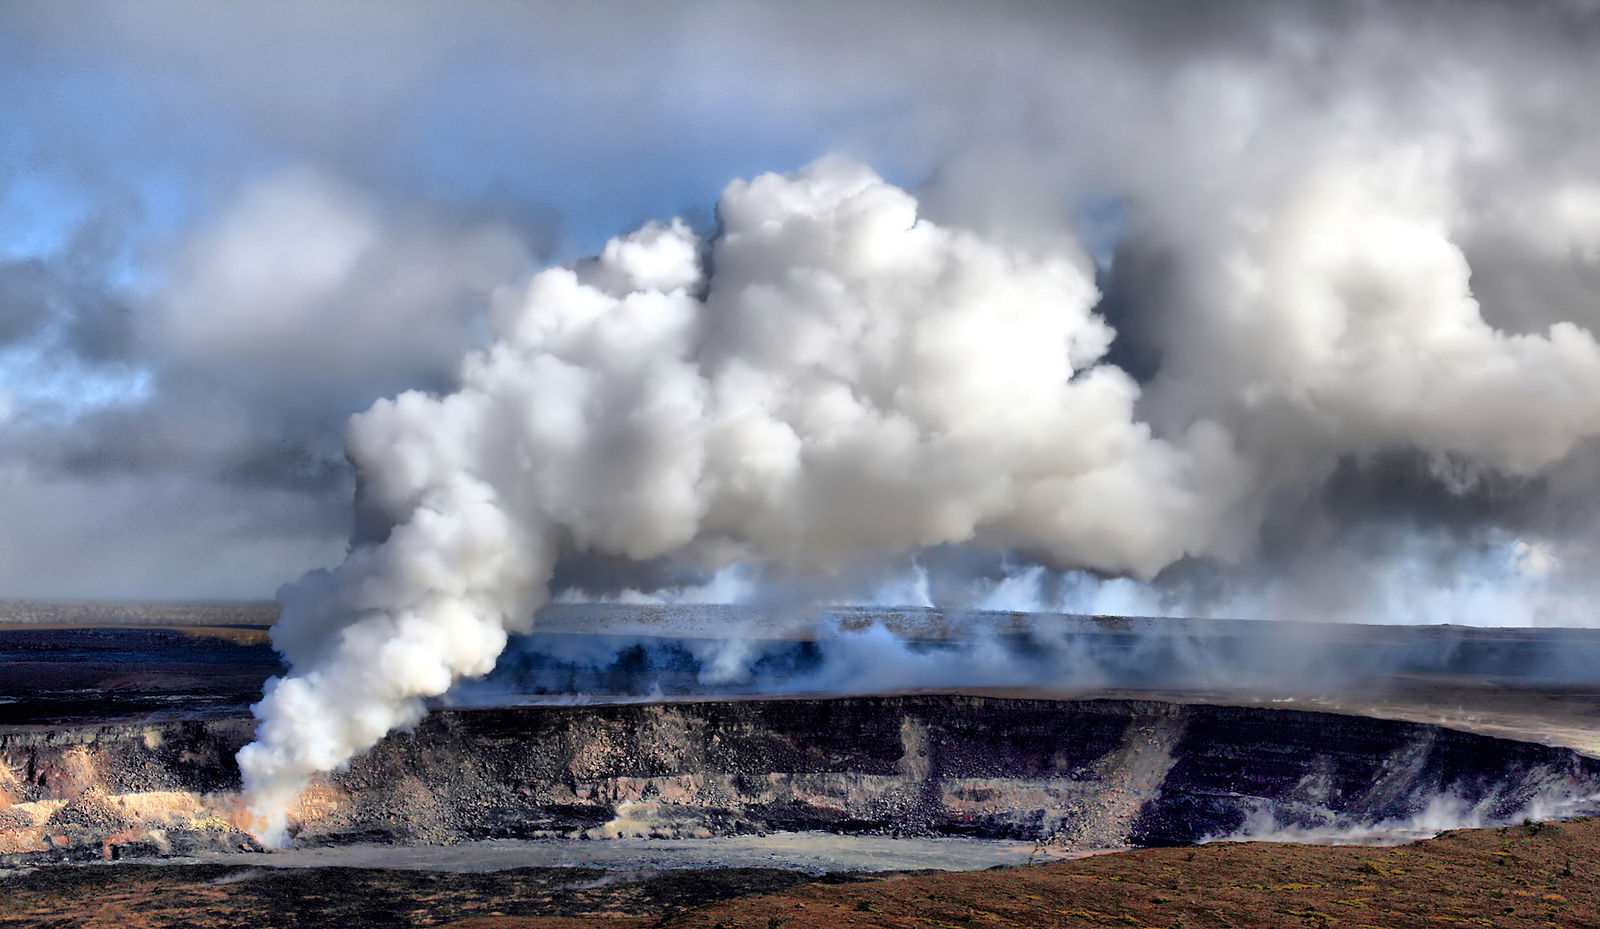 39 new sources of manmade sulfur dioxide pollution discovered by NASA